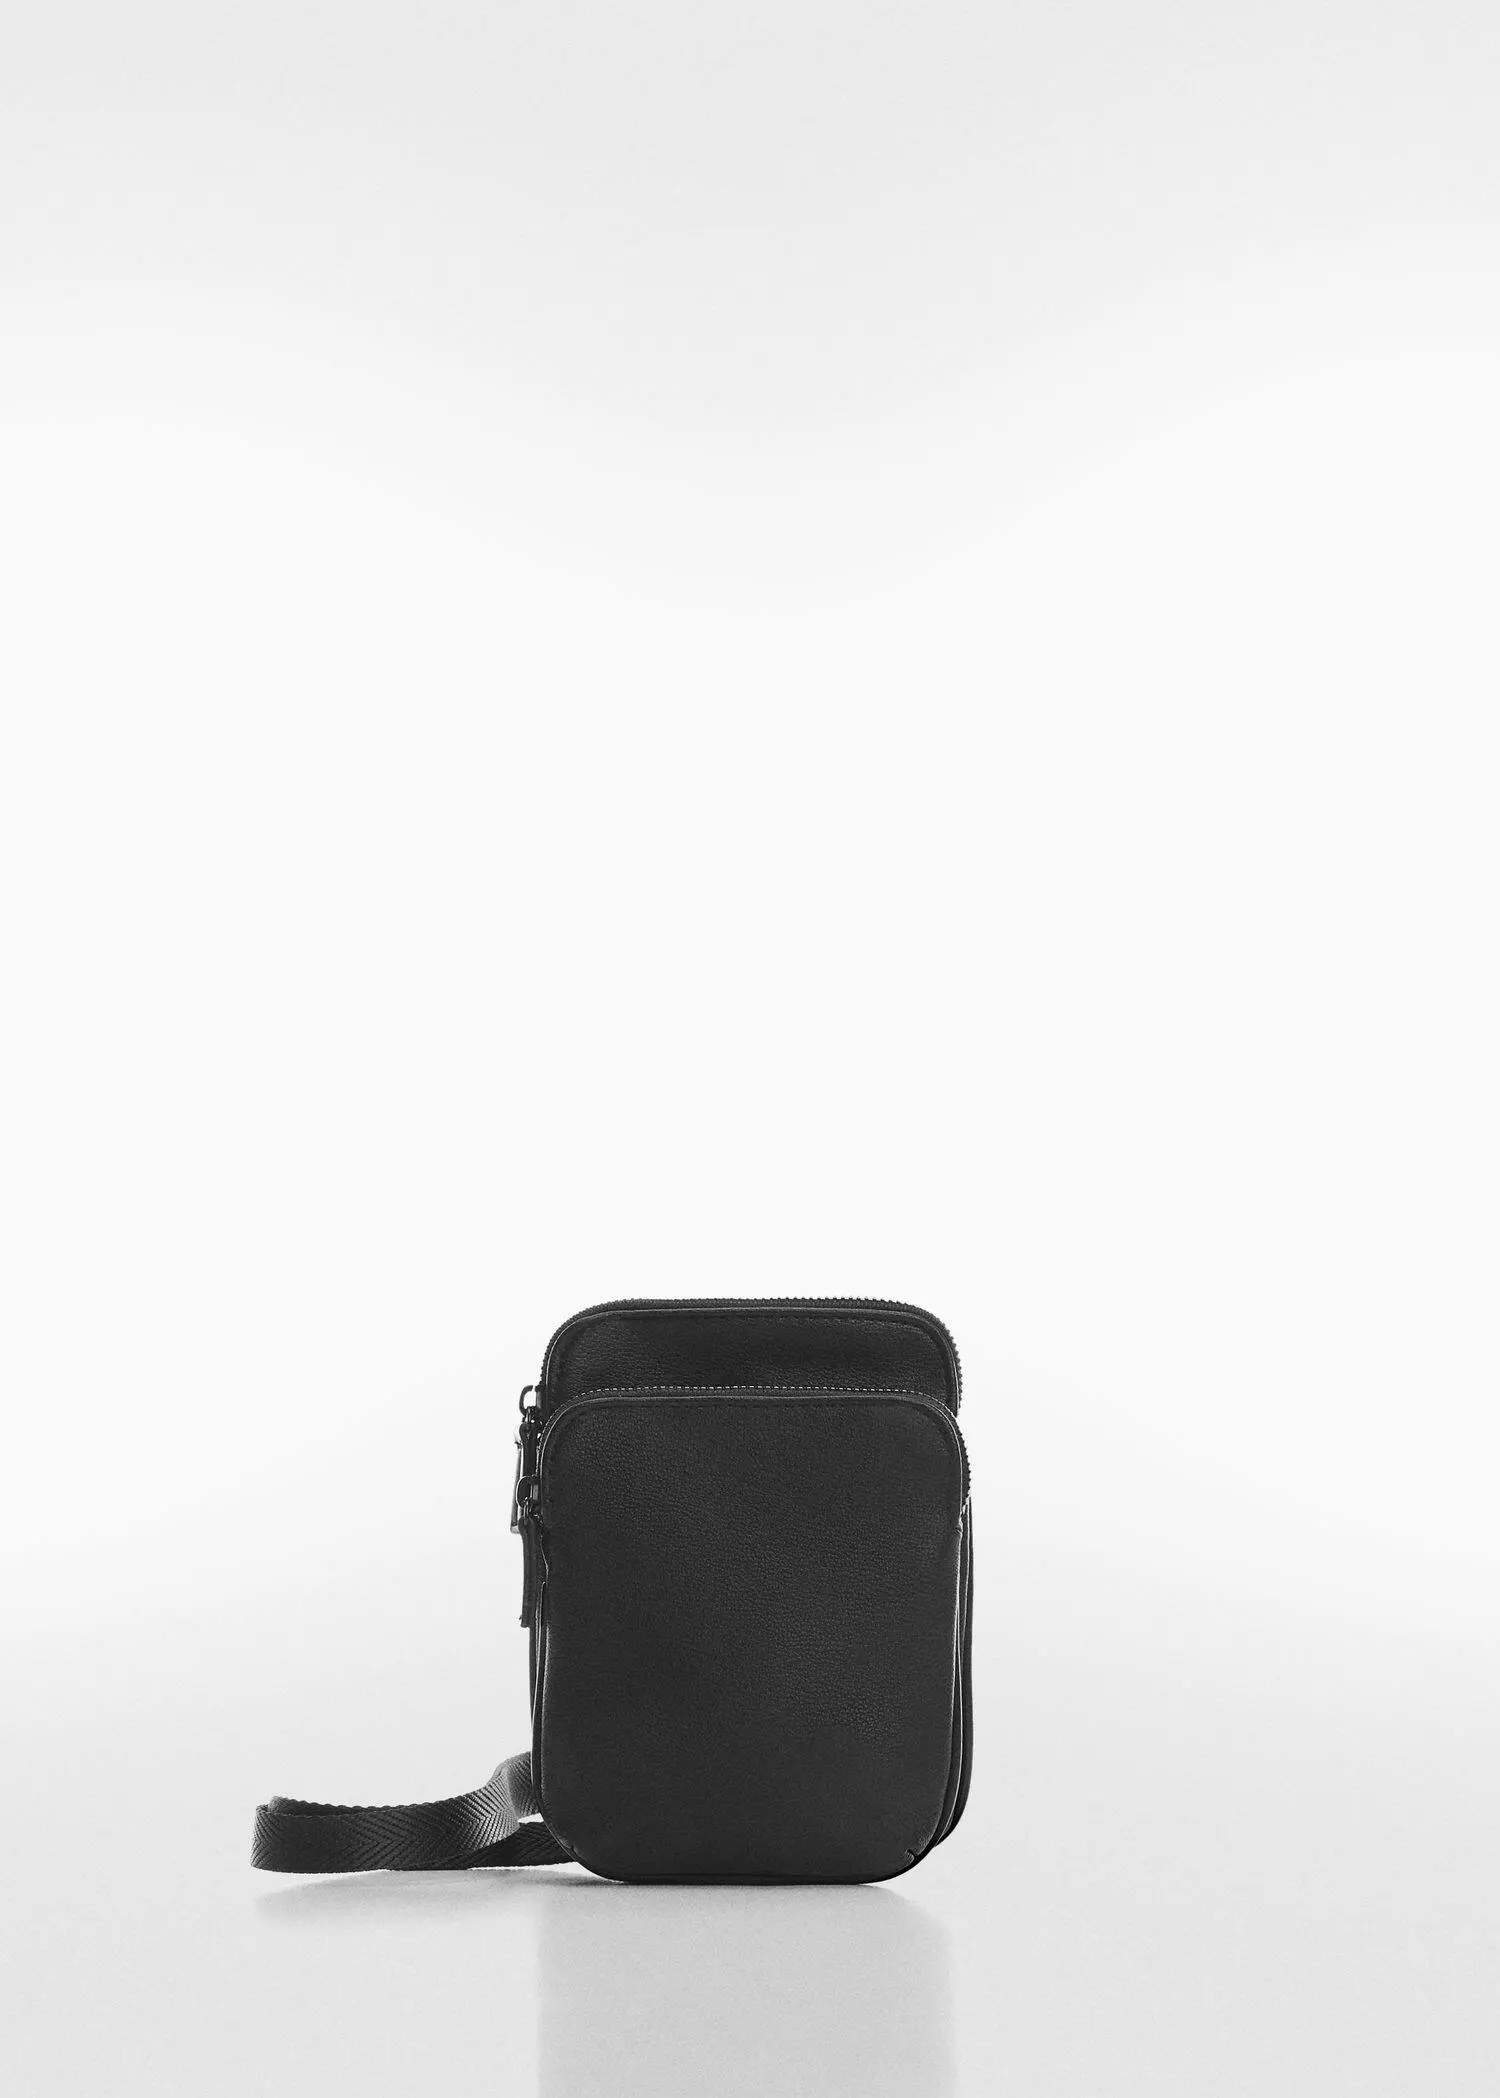 Mango Mini leather-effect shoulder bag. a black bag sitting on top of a white table. 